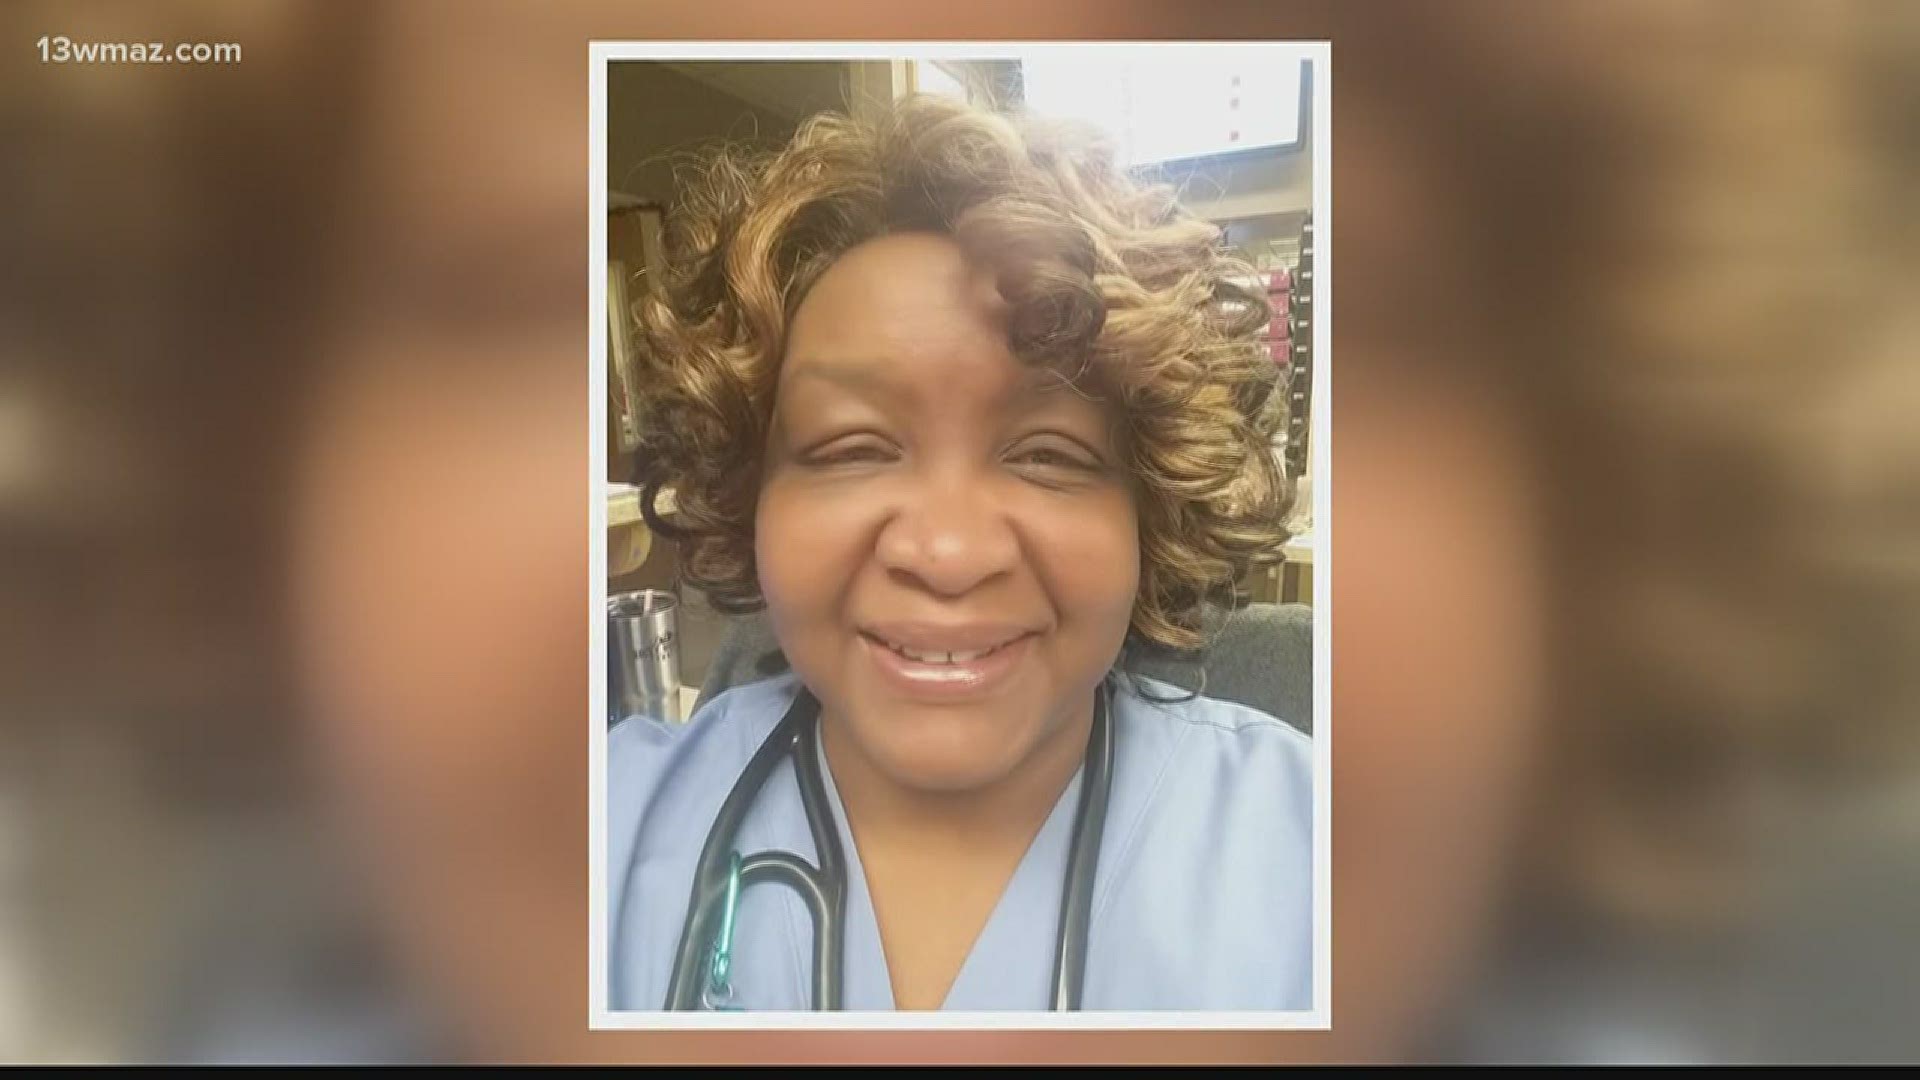 A Coliseum Medical Centers nurse is out of the hospital after testing positive for COVID-19 and being placed on a ventilator.